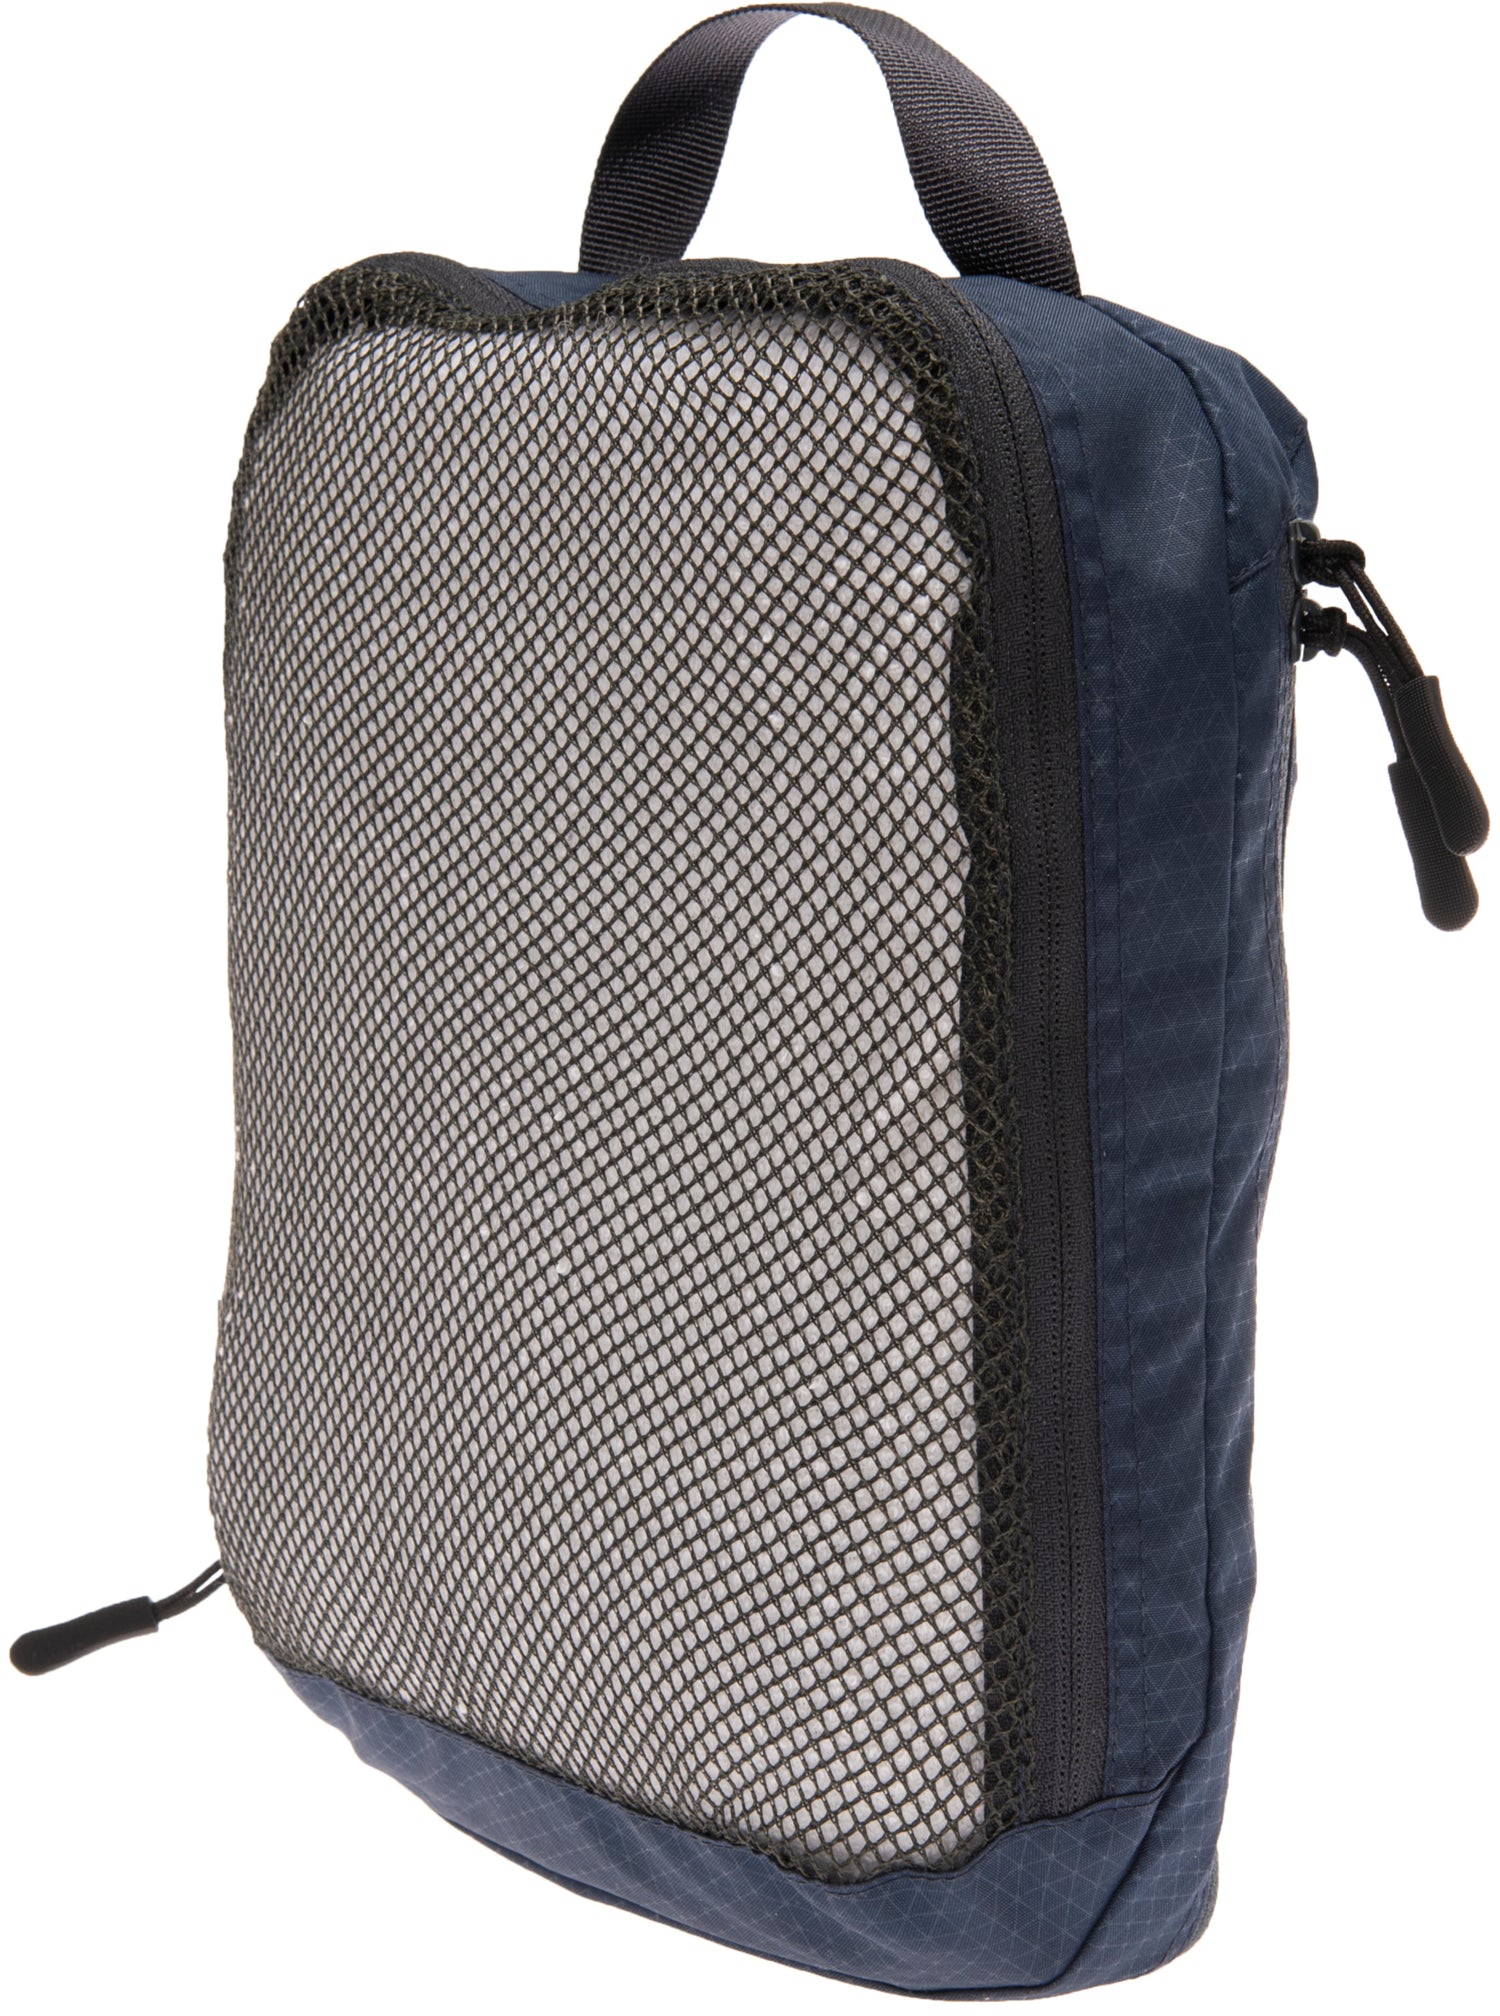 Cocoon Two-in-One Separated Packing Cube Size M galaxy blue